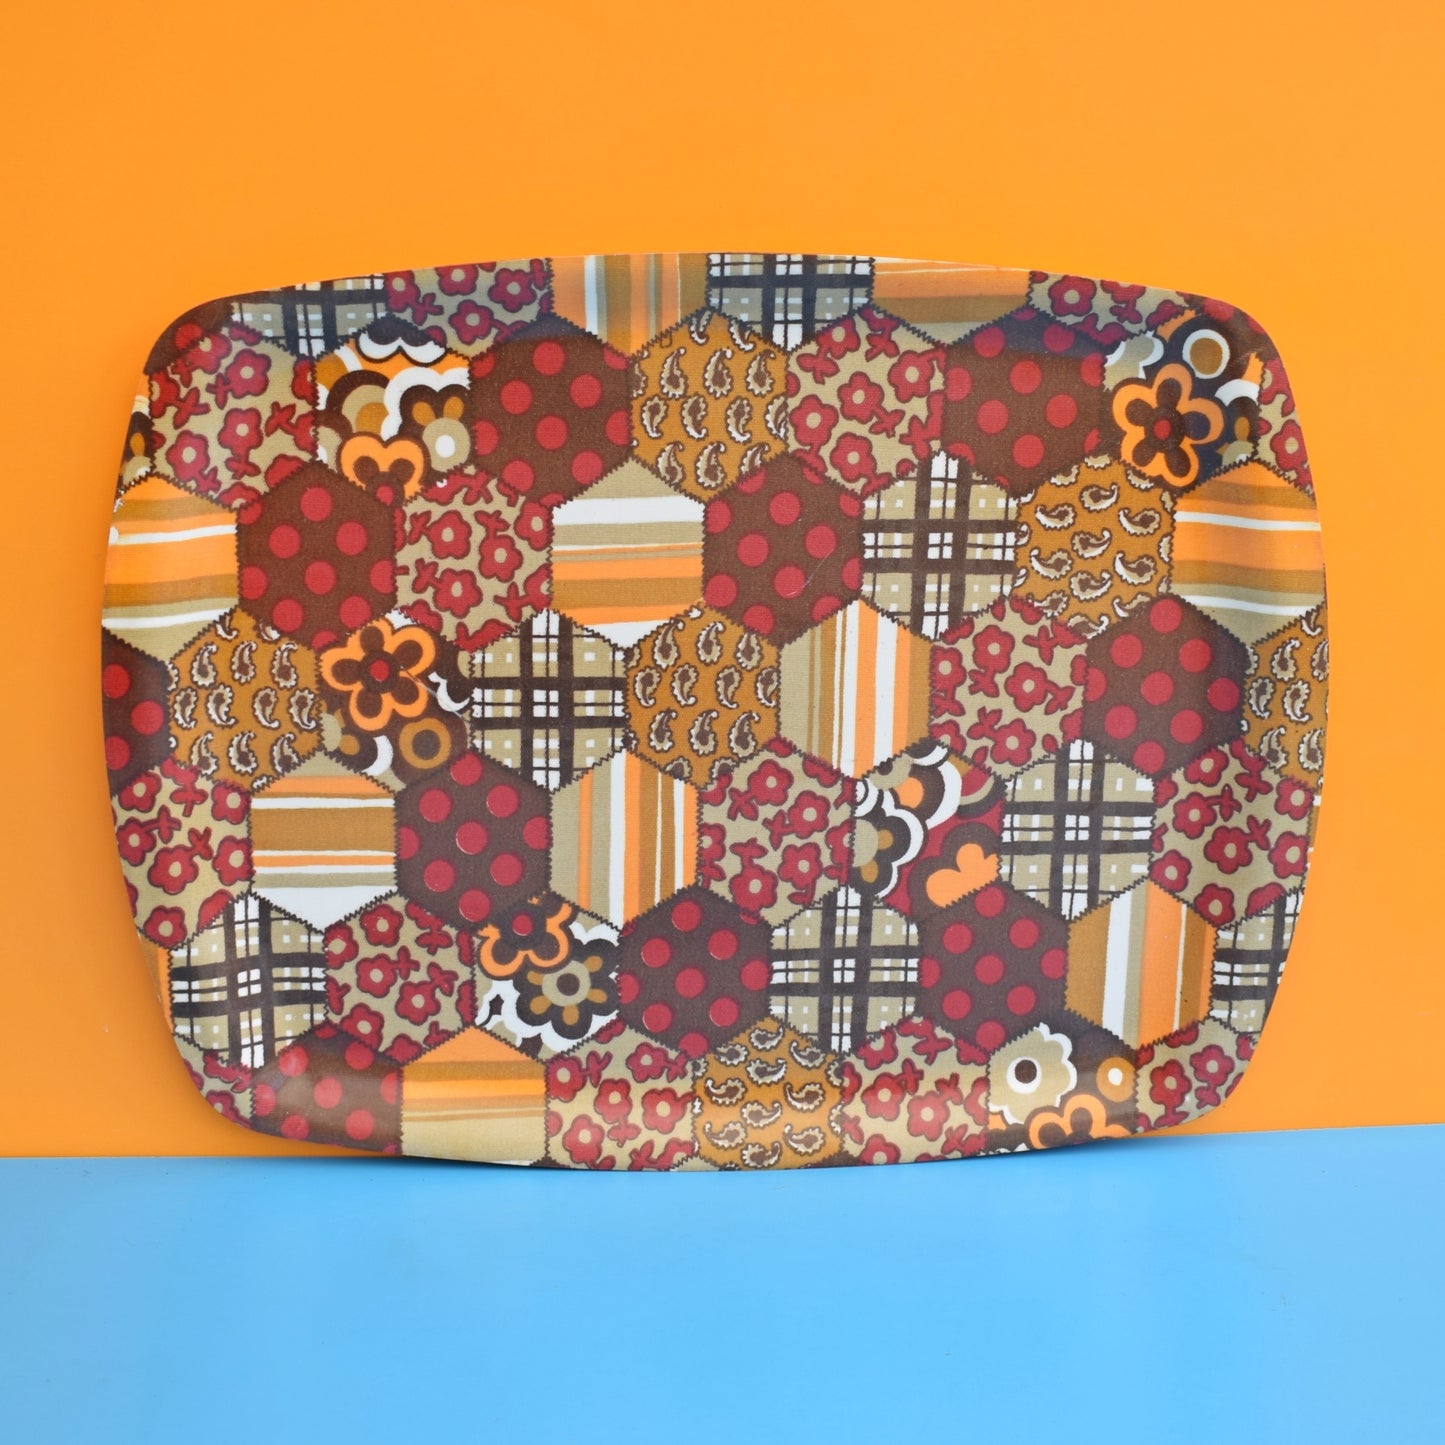 Vintage 1960s Patchwork Style Tray - Brown